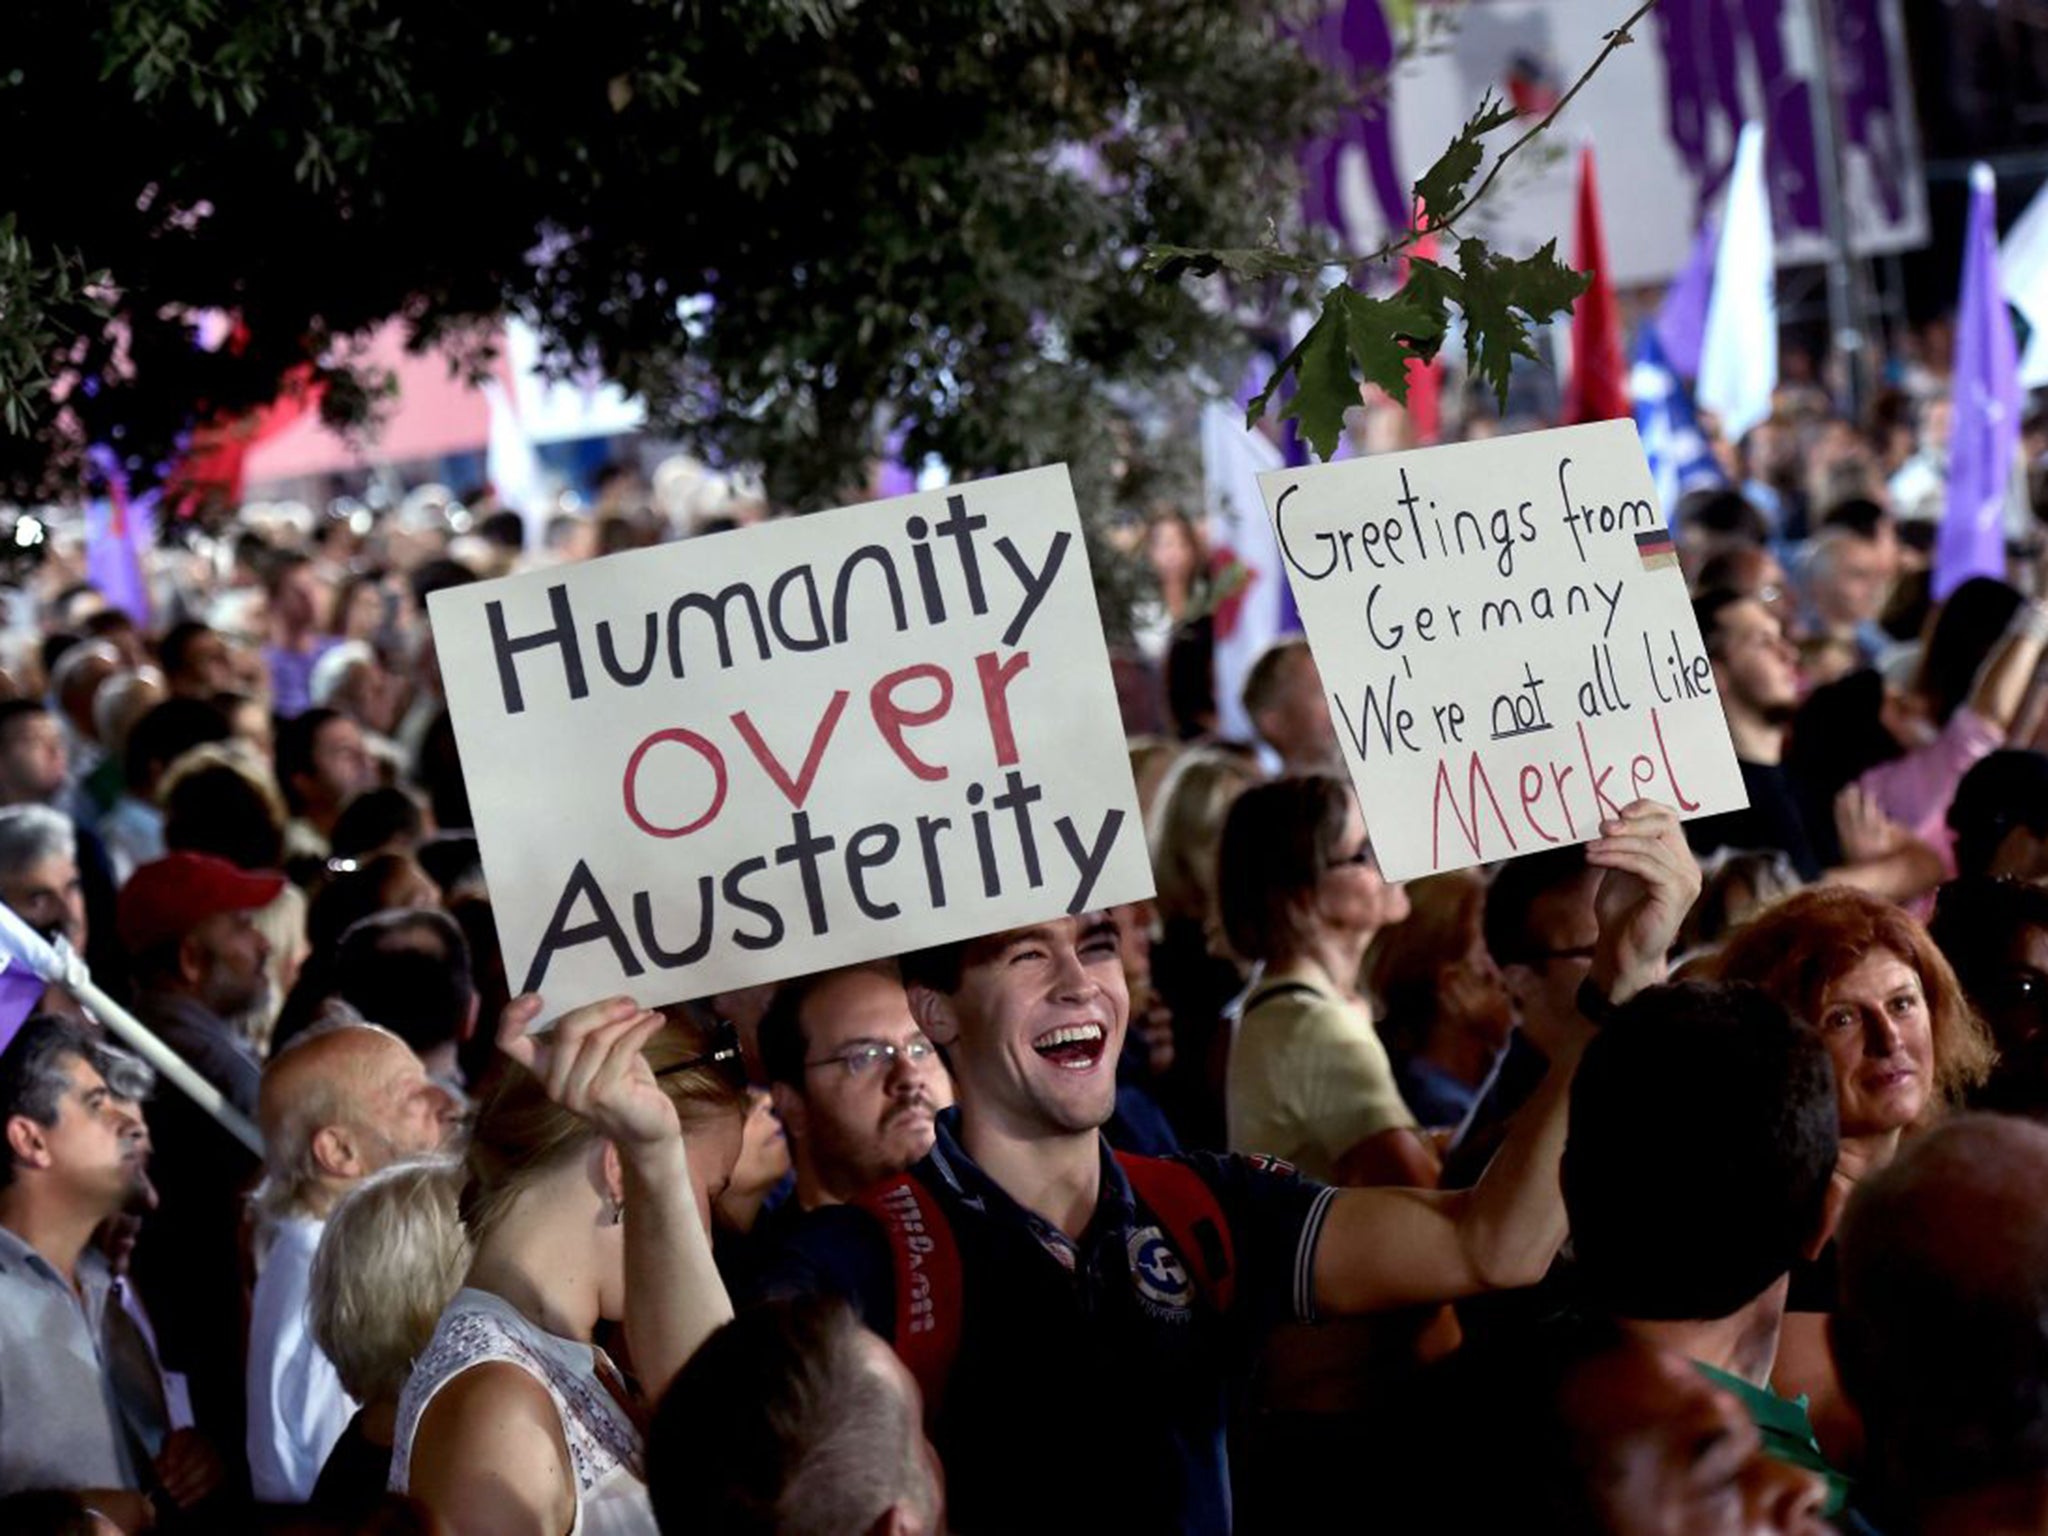 Demonstrators at a rally in support of the Syriza party in Syntagma Square, Athens, Greece